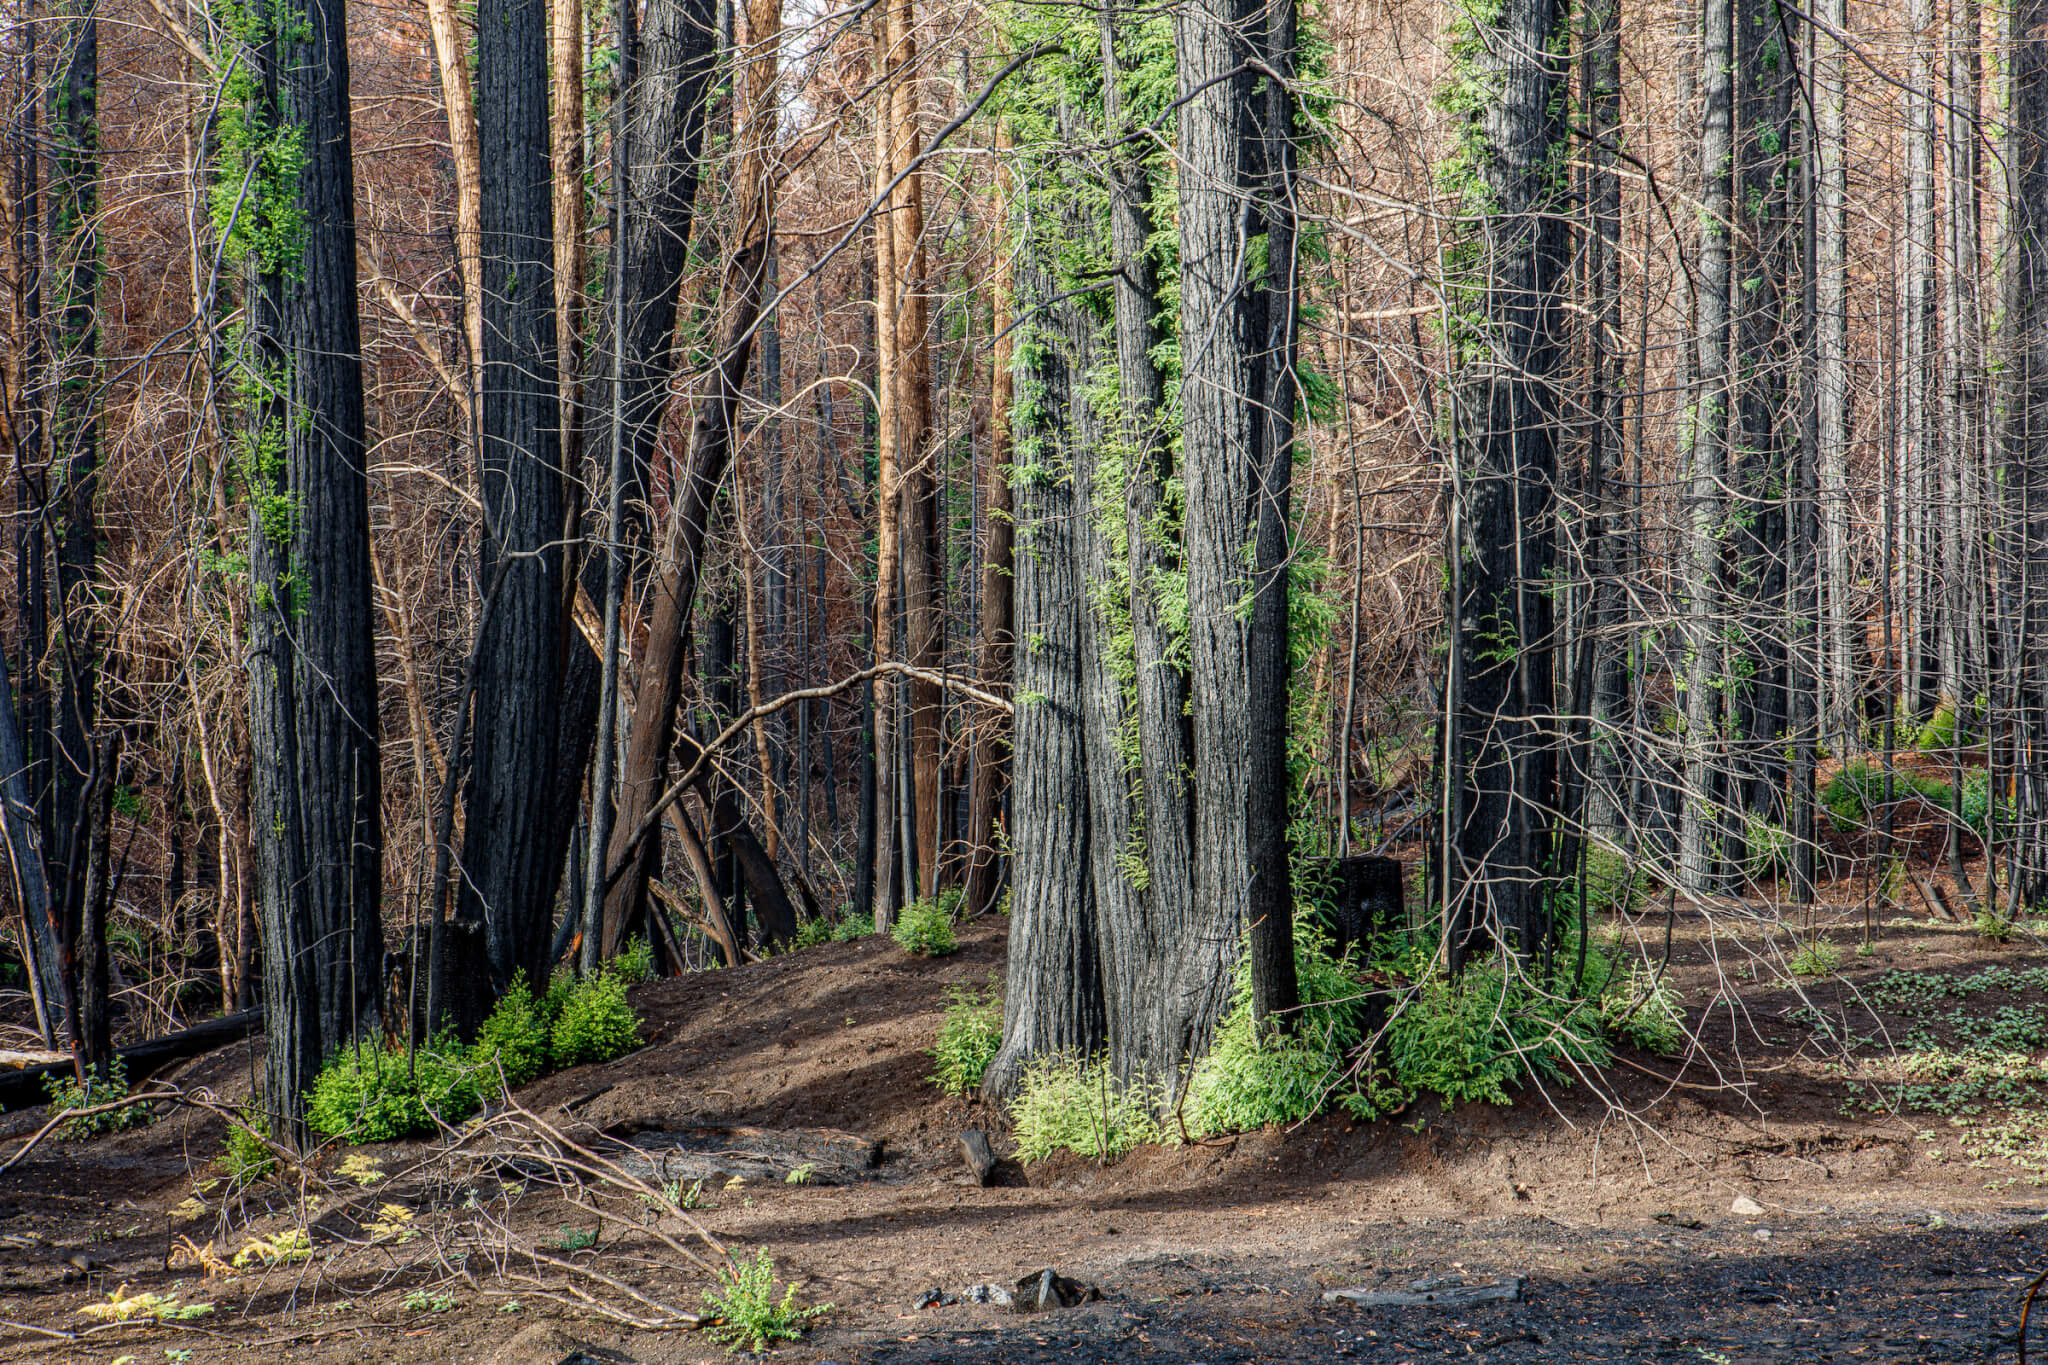 Redwood Trees Sprout New Growth, Charred But Alive After The CZU Lightning Complex Fire. by I. Bornarth